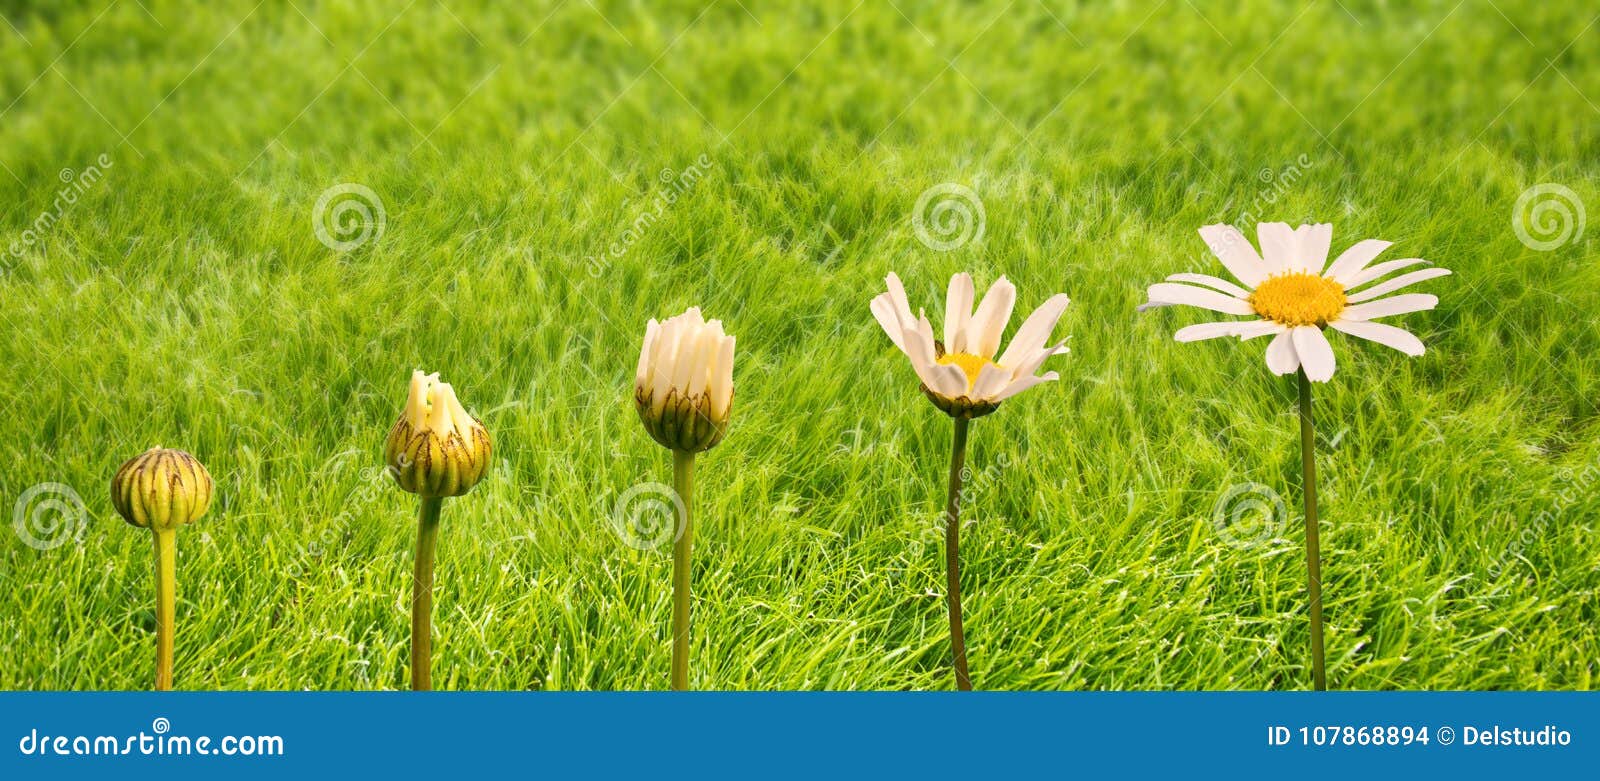 stages of growth and flowering of a daisy, green grass background, life transformation concept